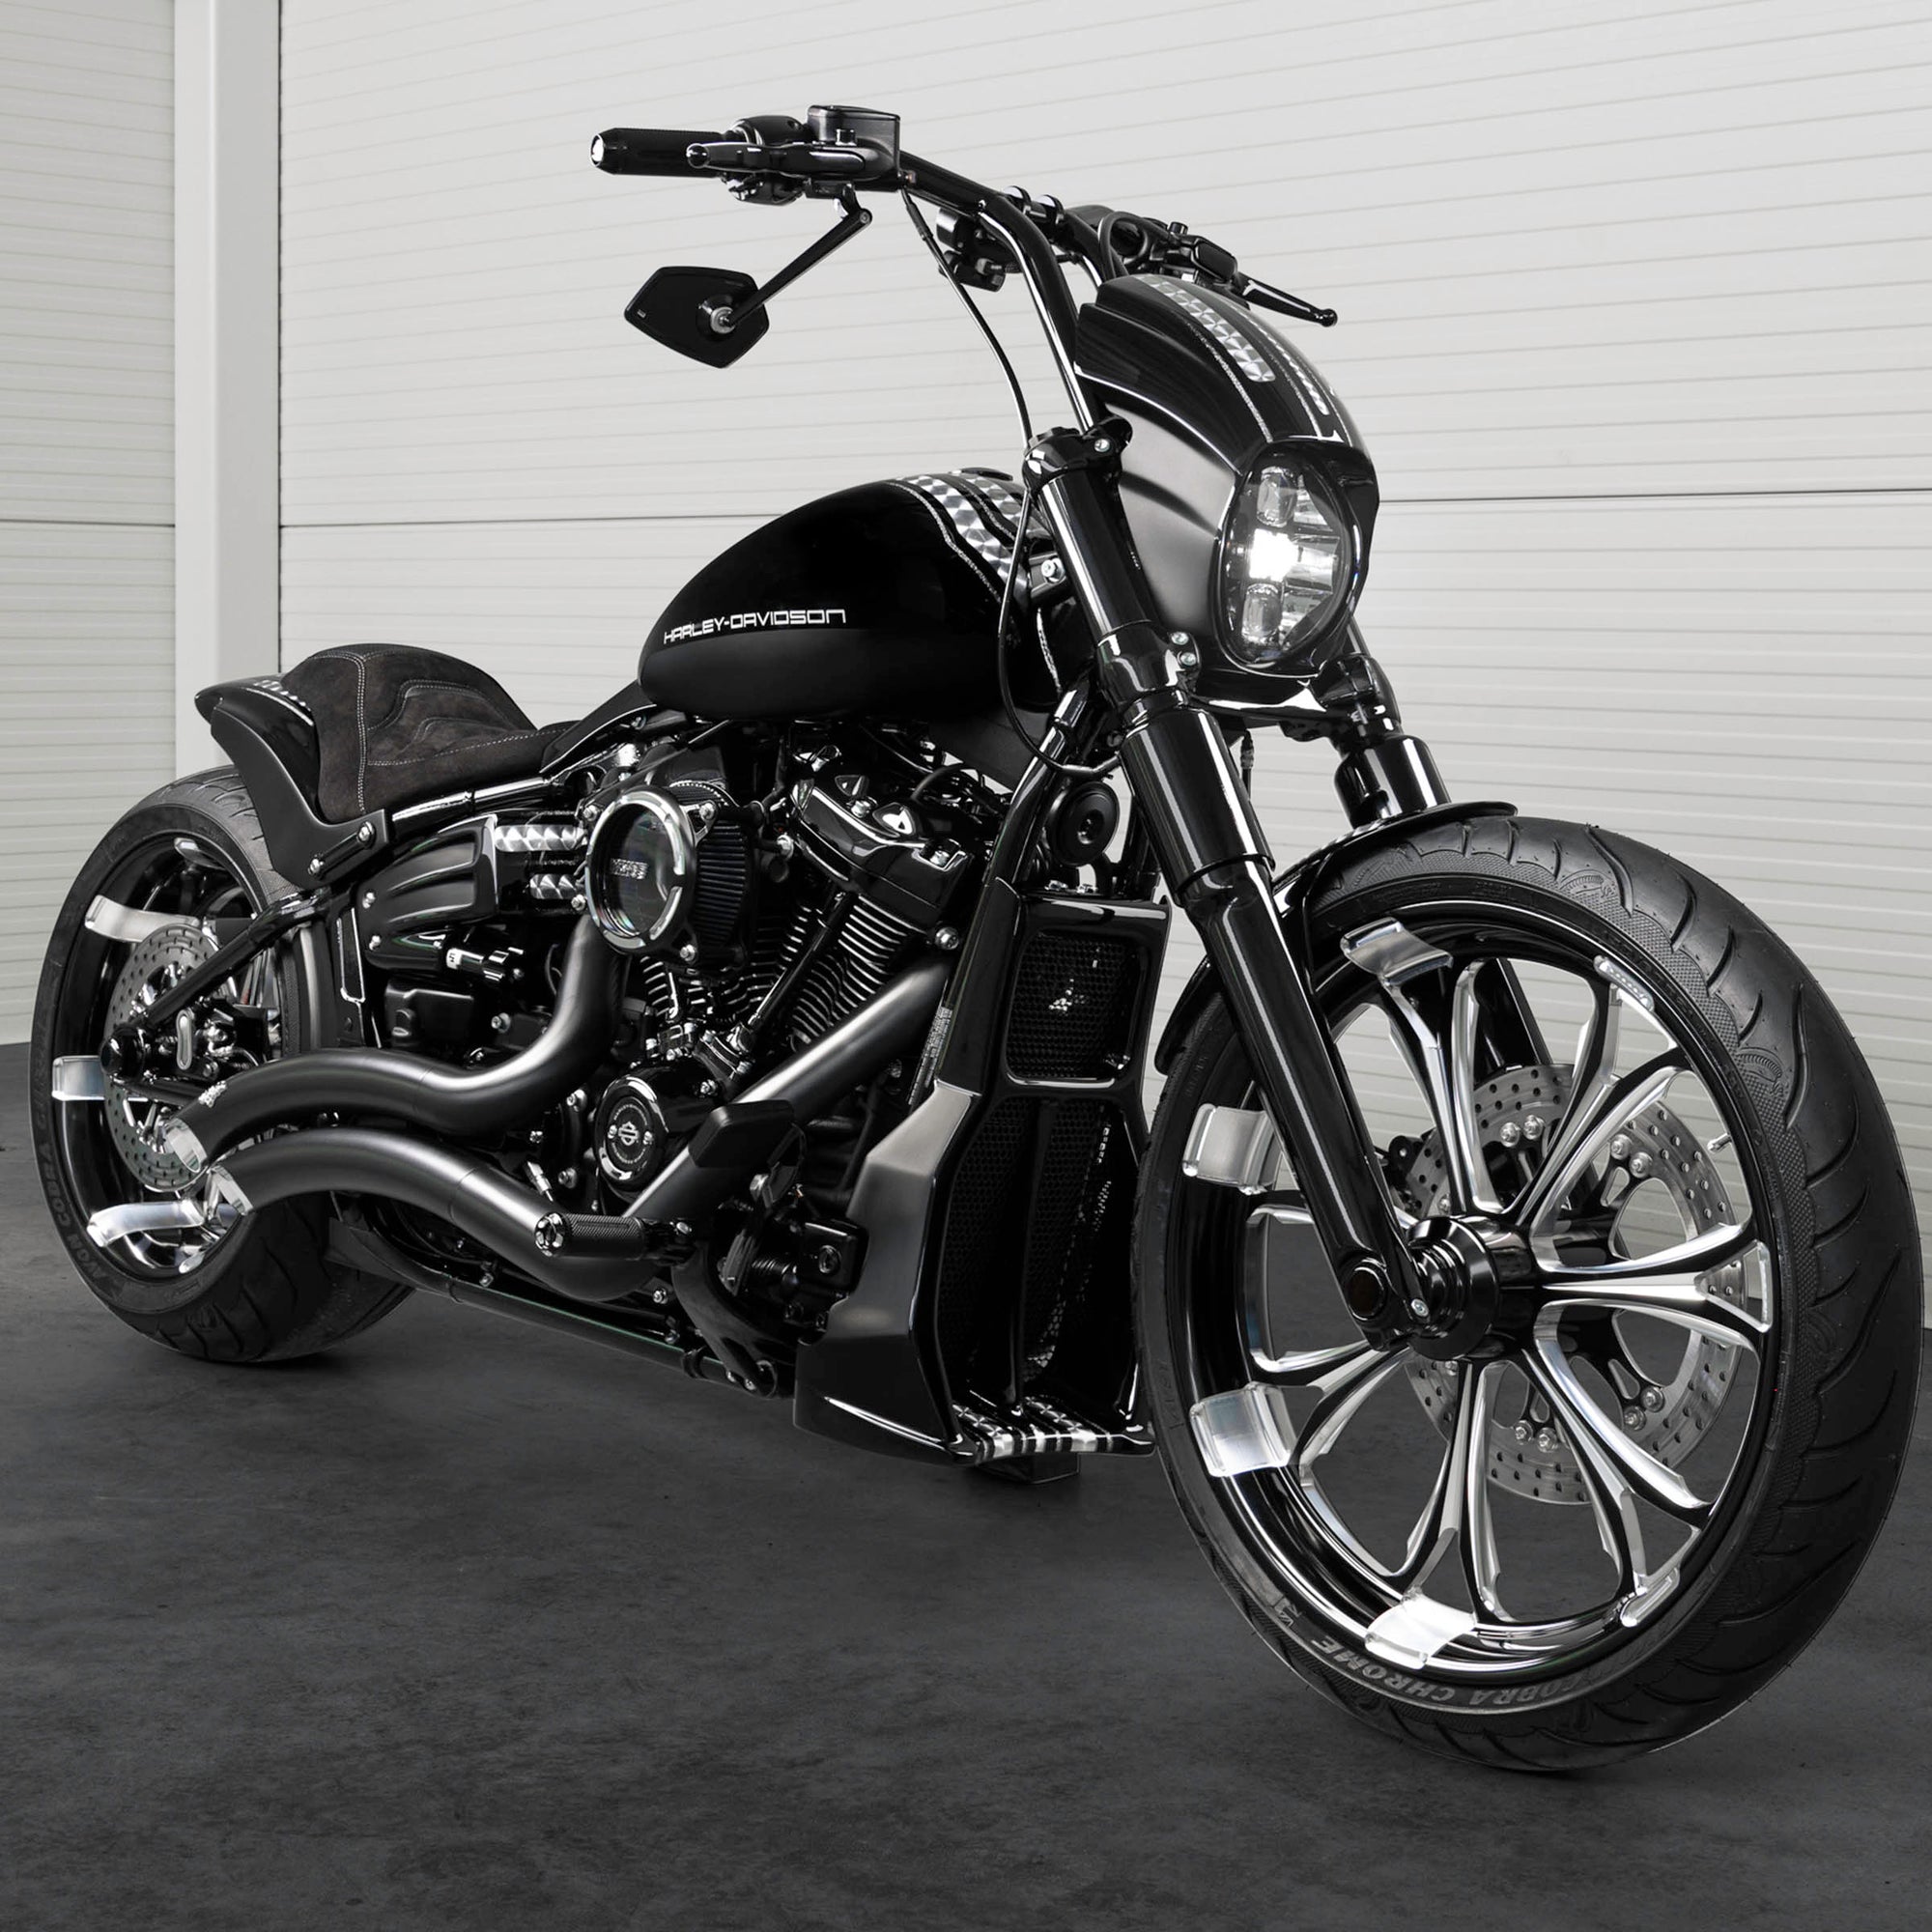 Harley Davidson motorcycle with Killer Custom parts from the front in a white modern bike shop